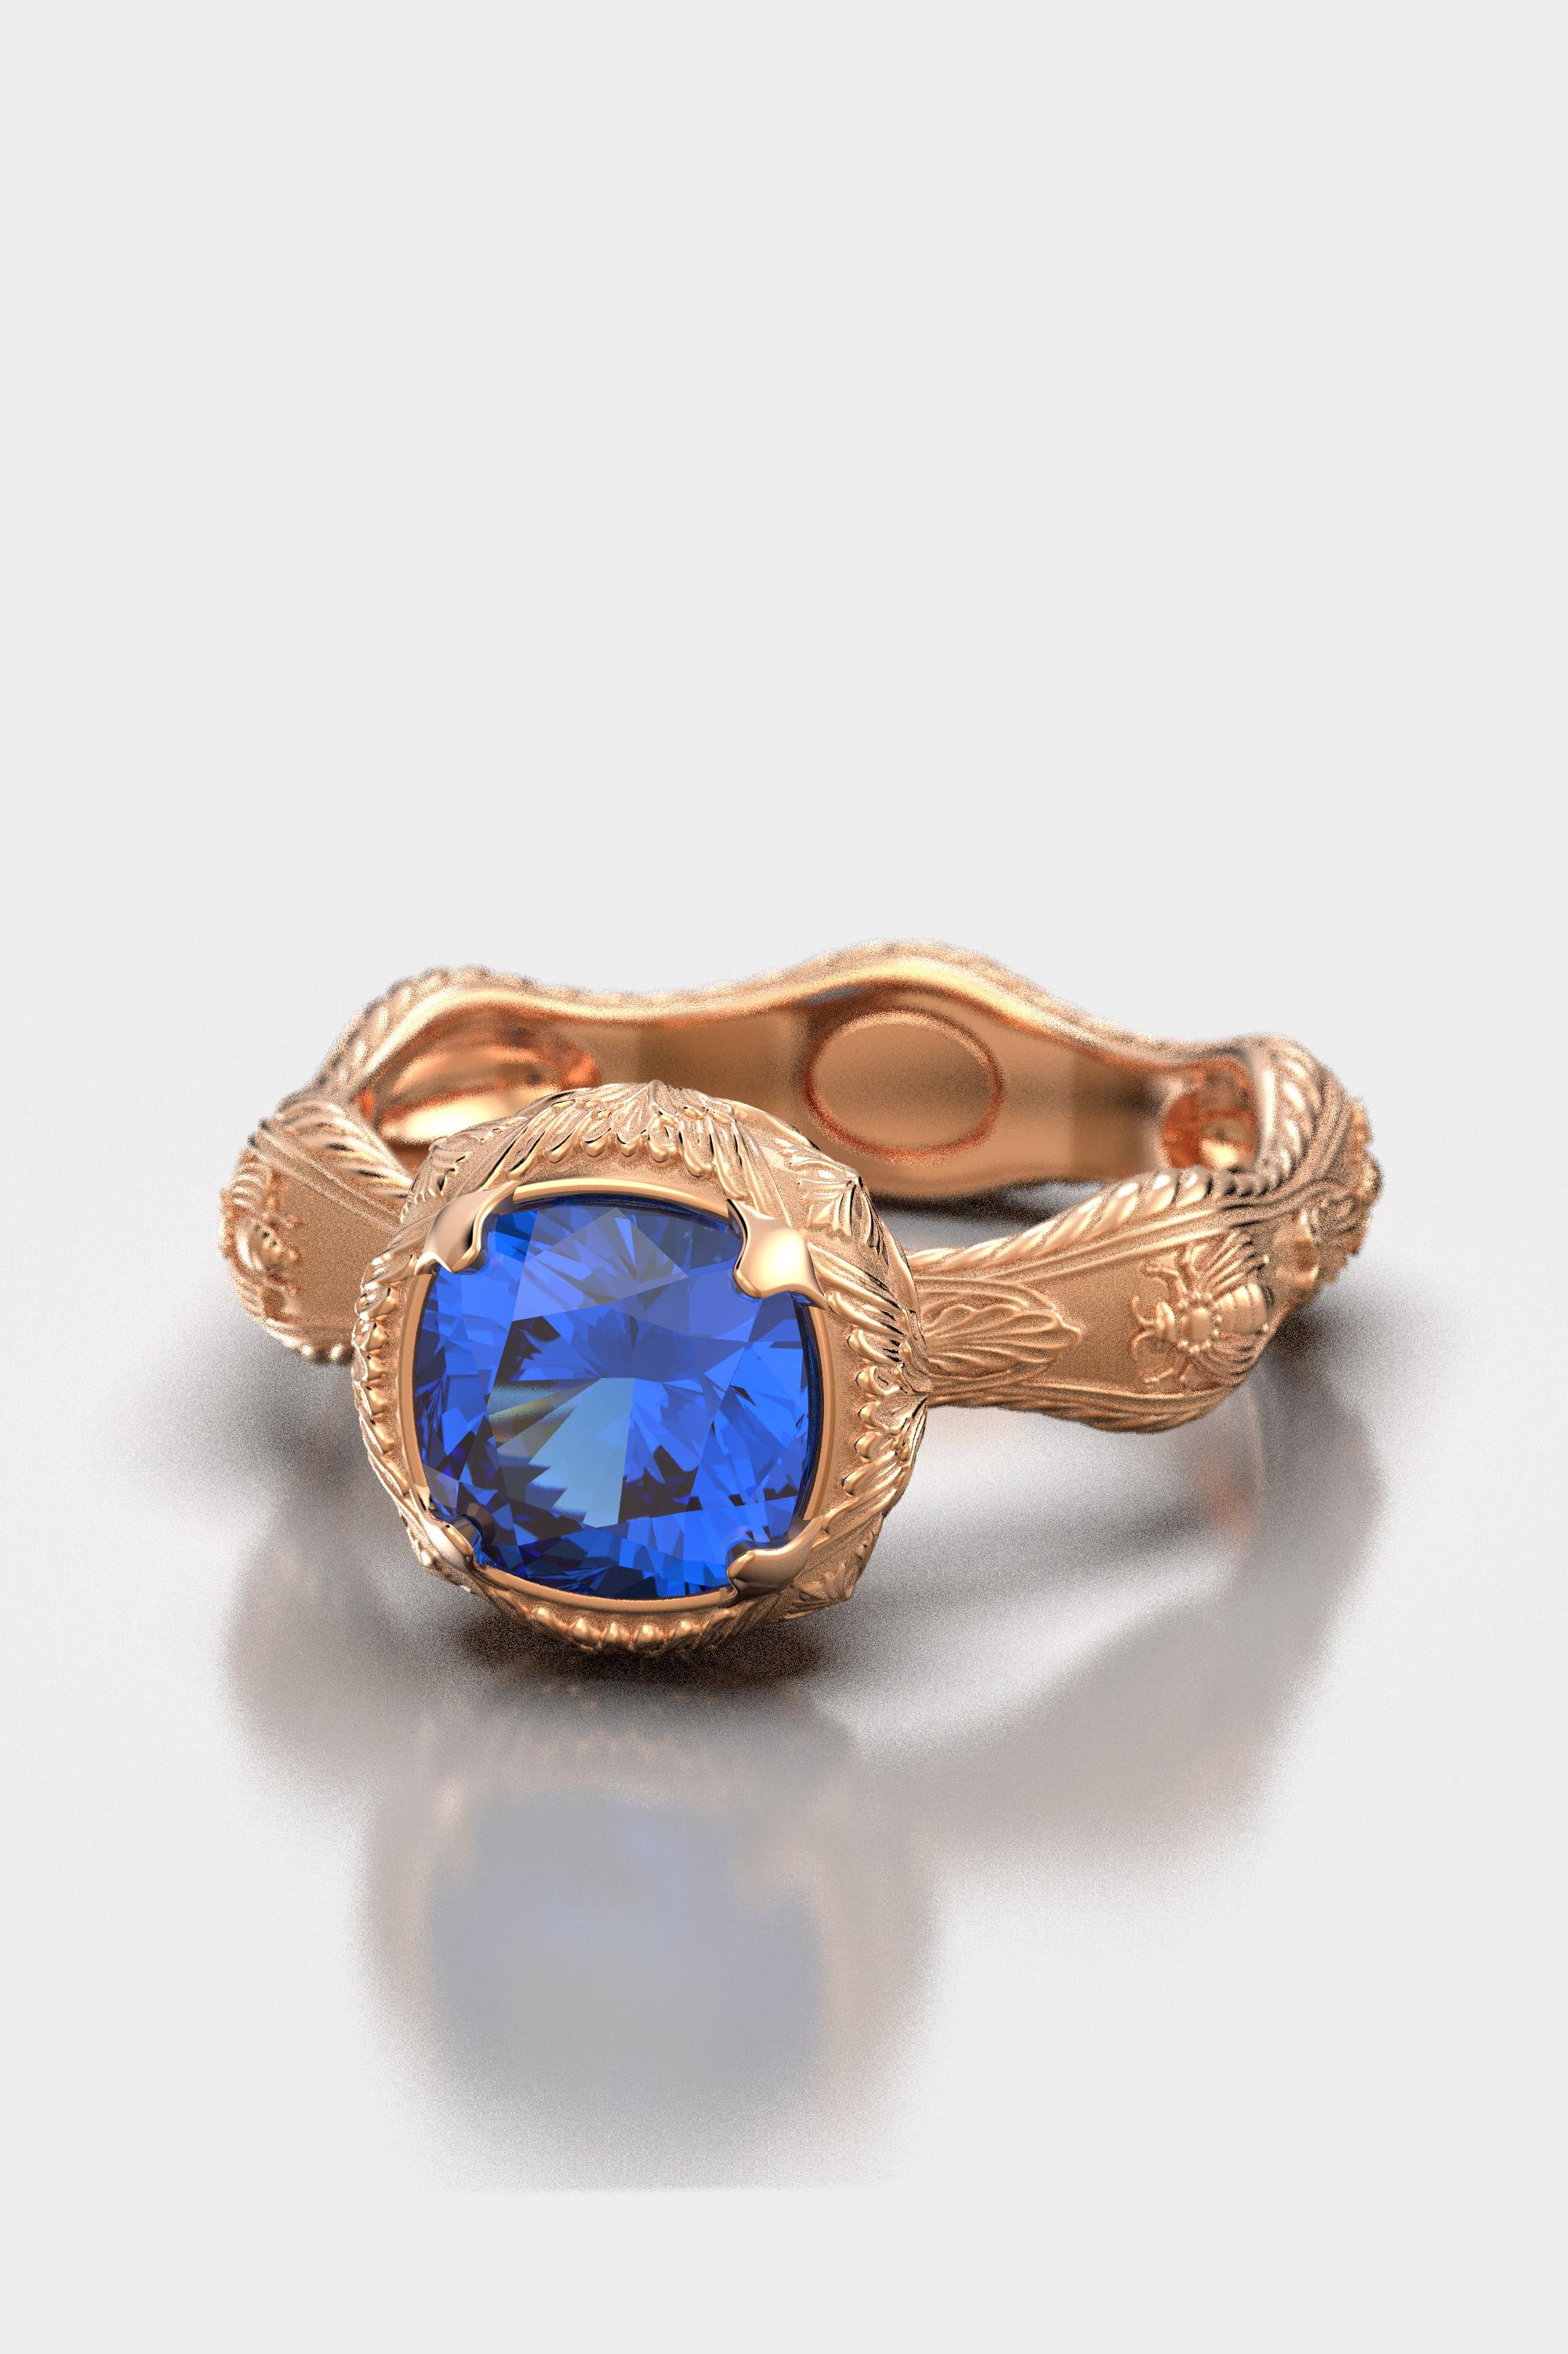 For Sale:  Tanzanite Ring Made In Italy by Oltremare Gioielli in 18k genuine gold 5